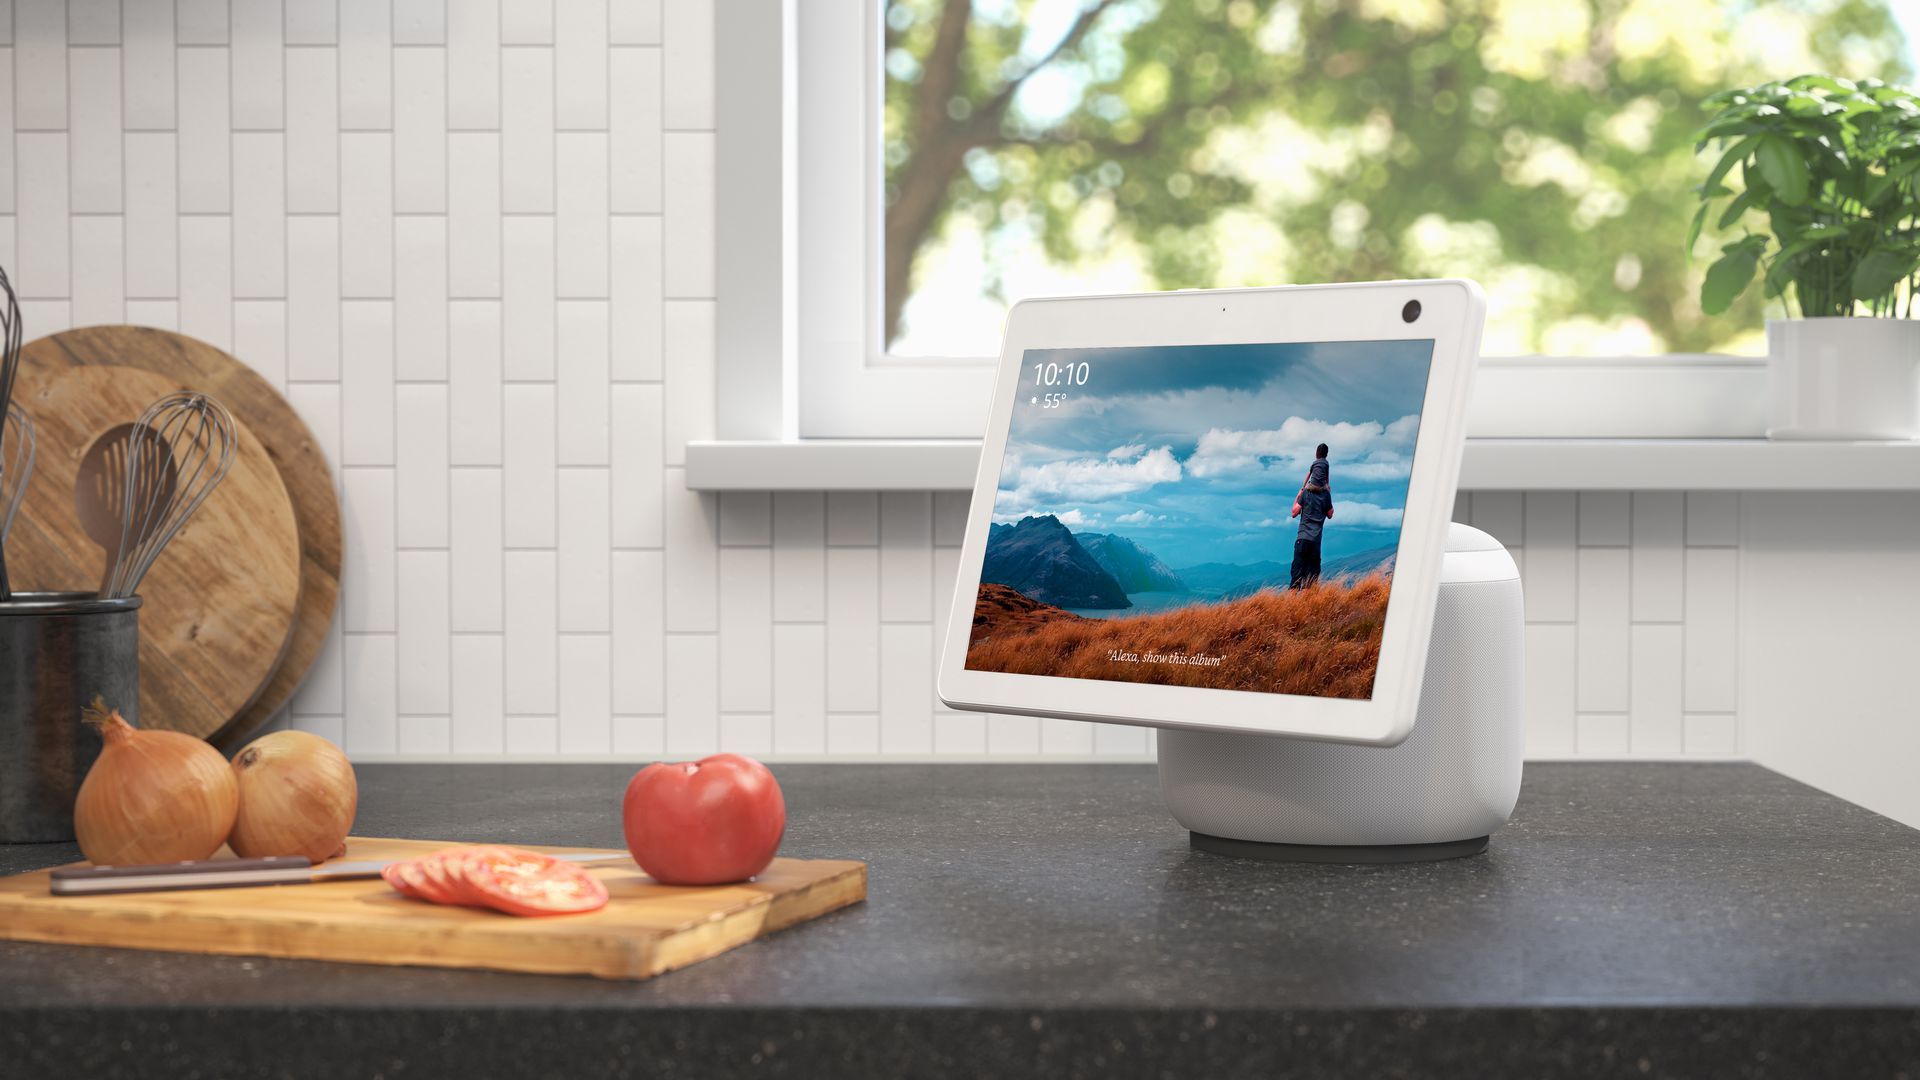 The new Echo Show 10 has a camera and screen that rotate to follow someone as they move around a room. Image: Amazon